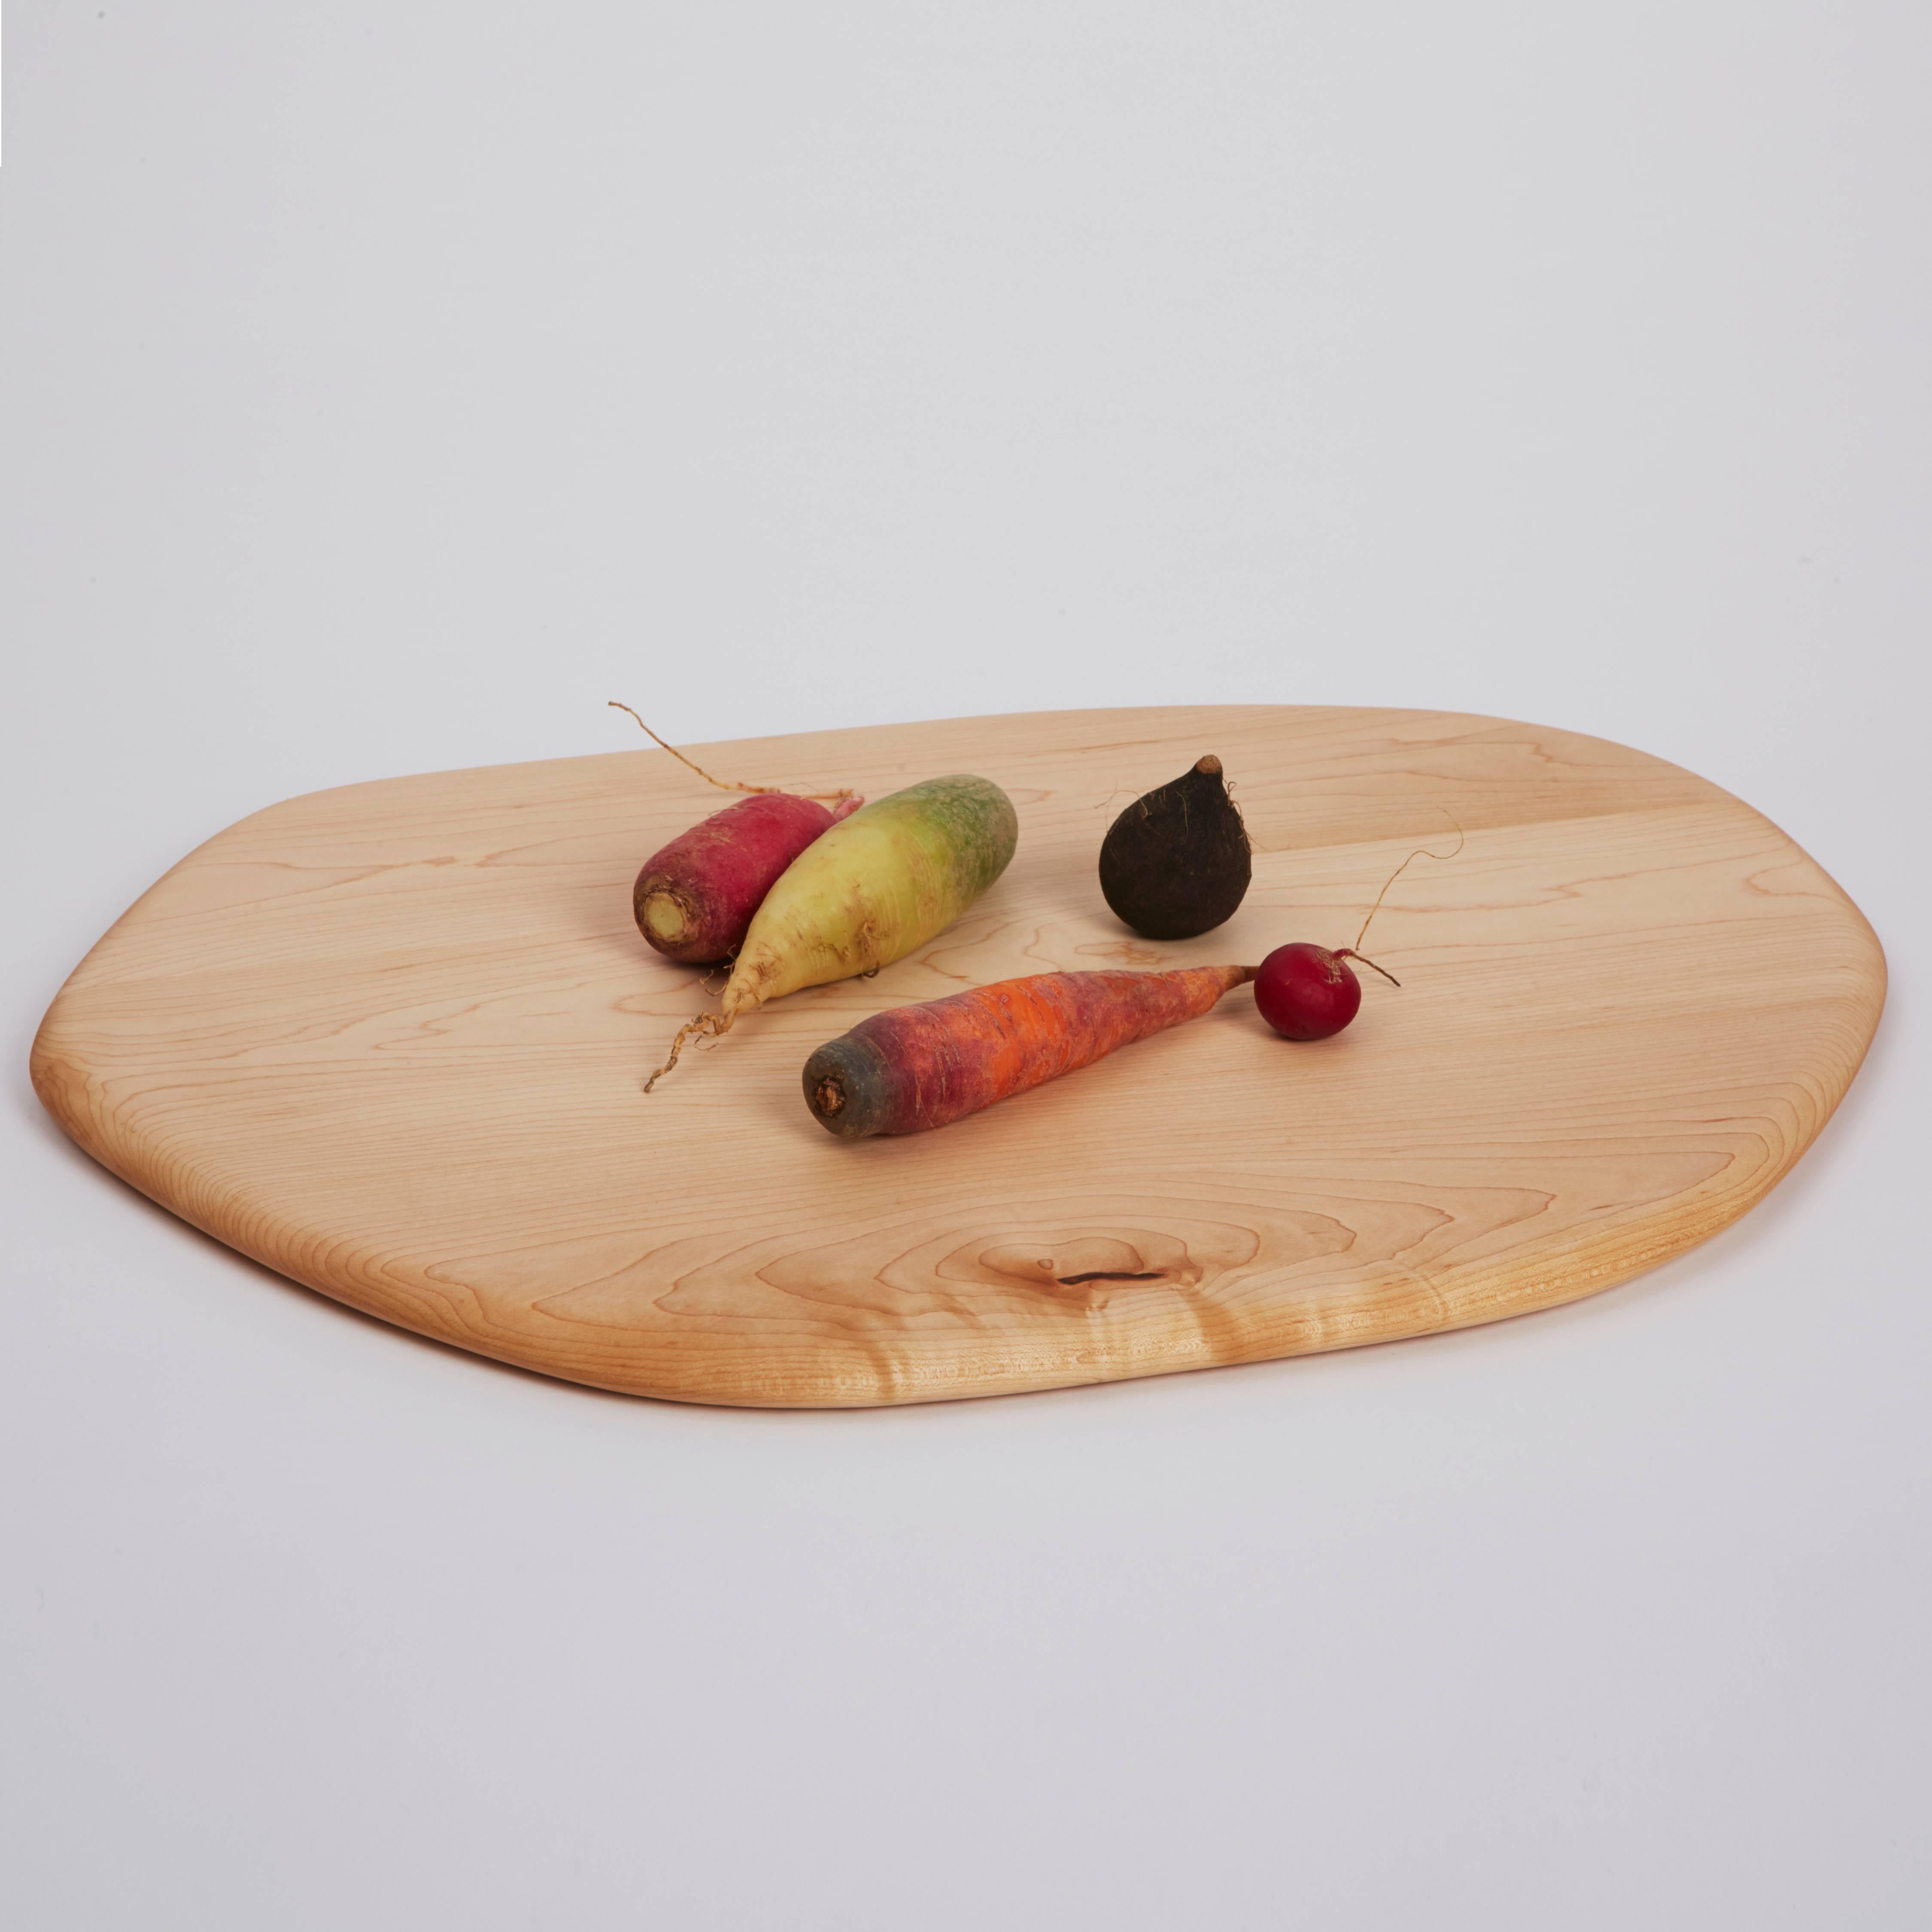 Other Medium Oval Maple Pebble Cutting Board